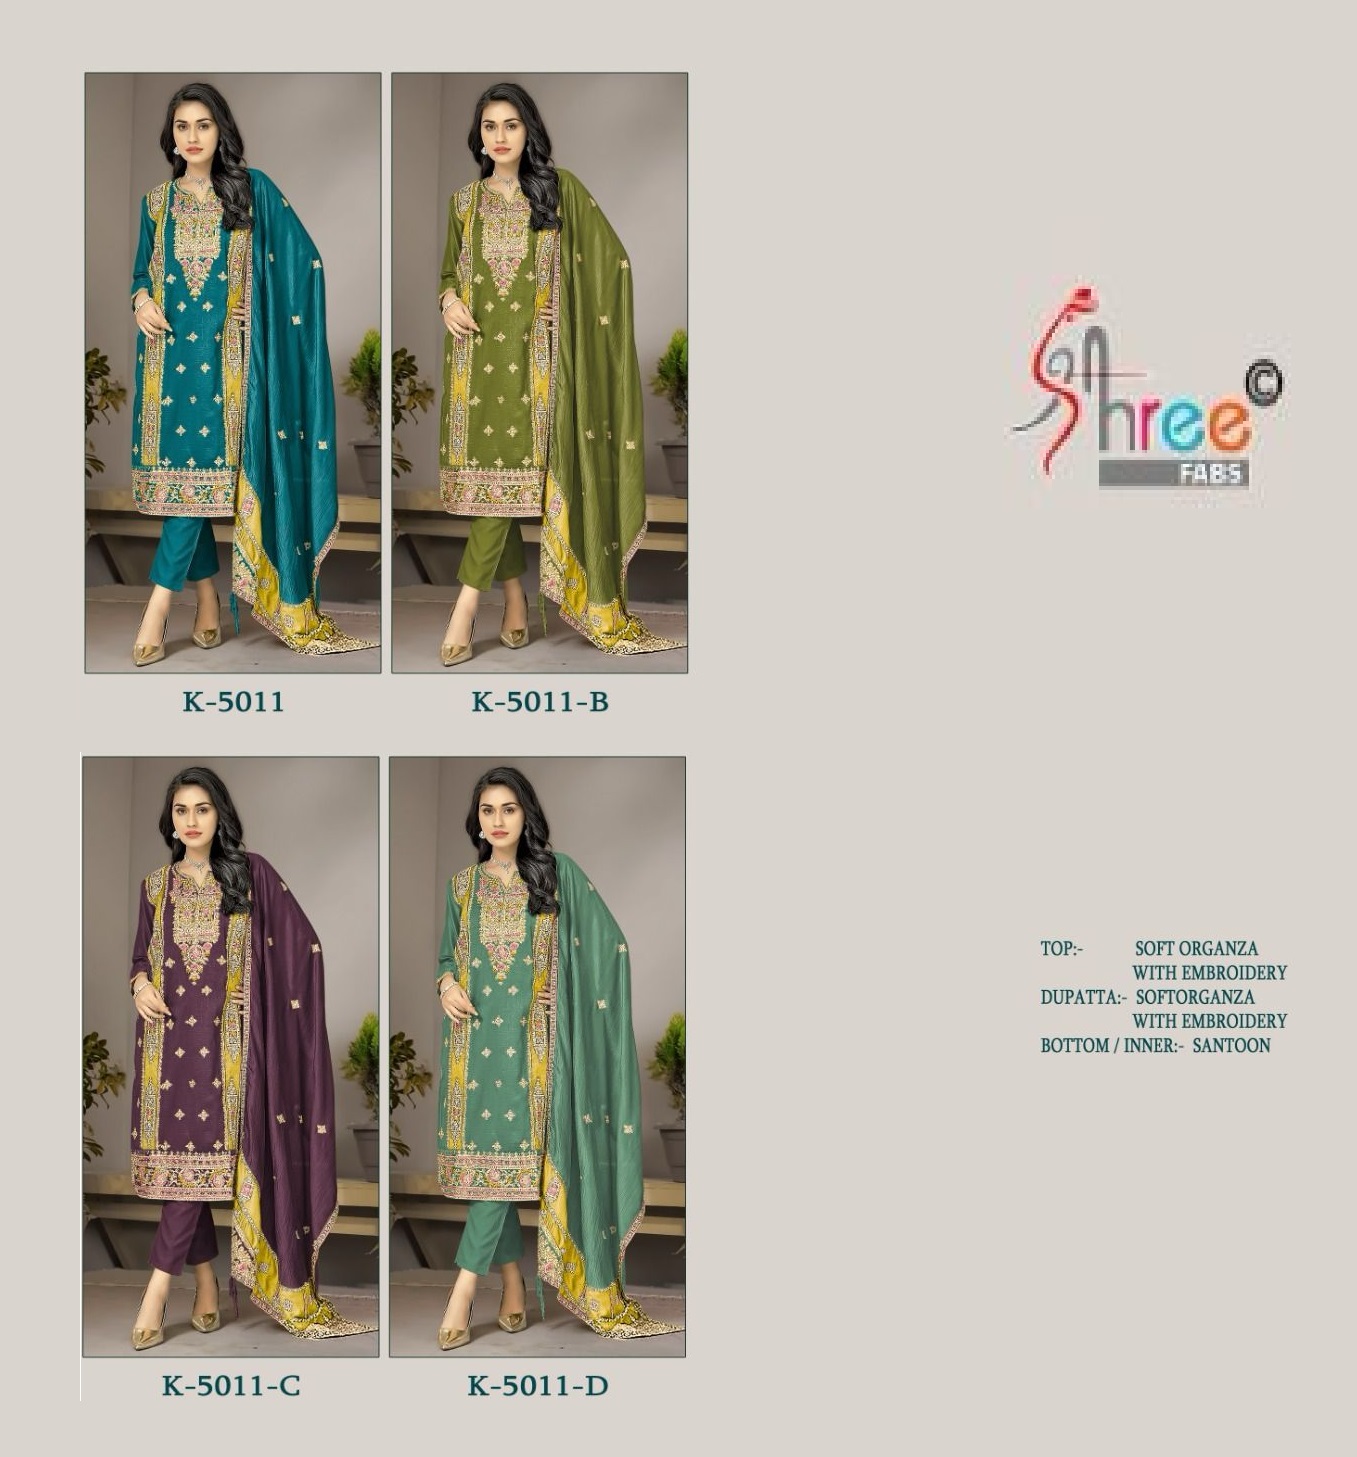 SHREE FABS K 5011 SERIES PAKISTANI SUITS IN INDIA